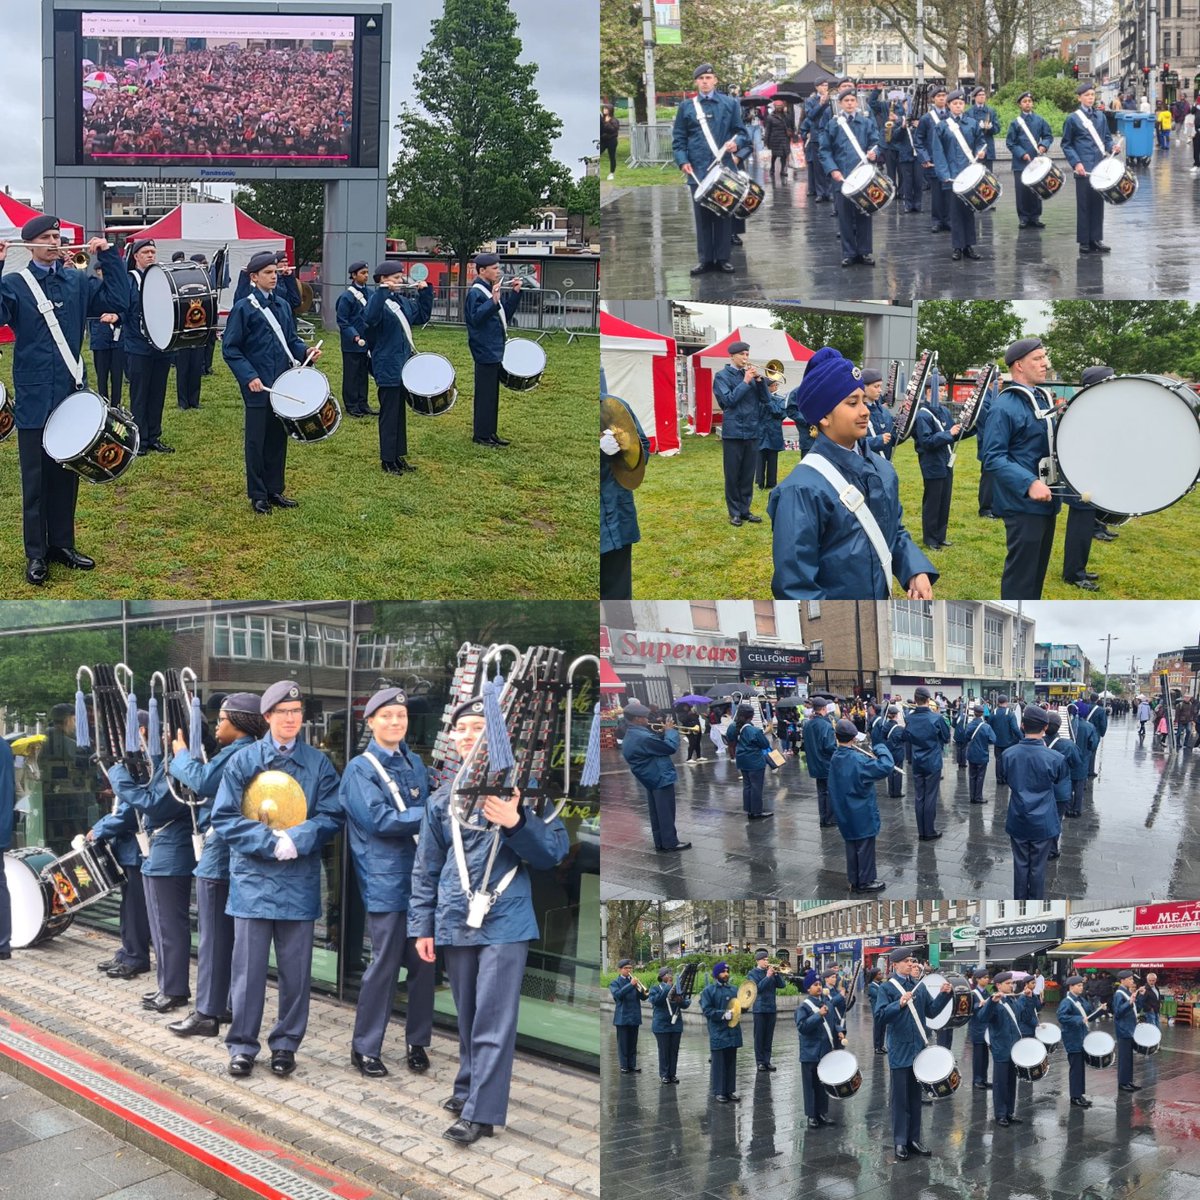 Cadets were on hand to celebrate the King's Coronation in Gordon Square @Royal_Greenwich @ThisisEltham @GLRFCA @GreenwichHour @Plmstd @JPFoundation